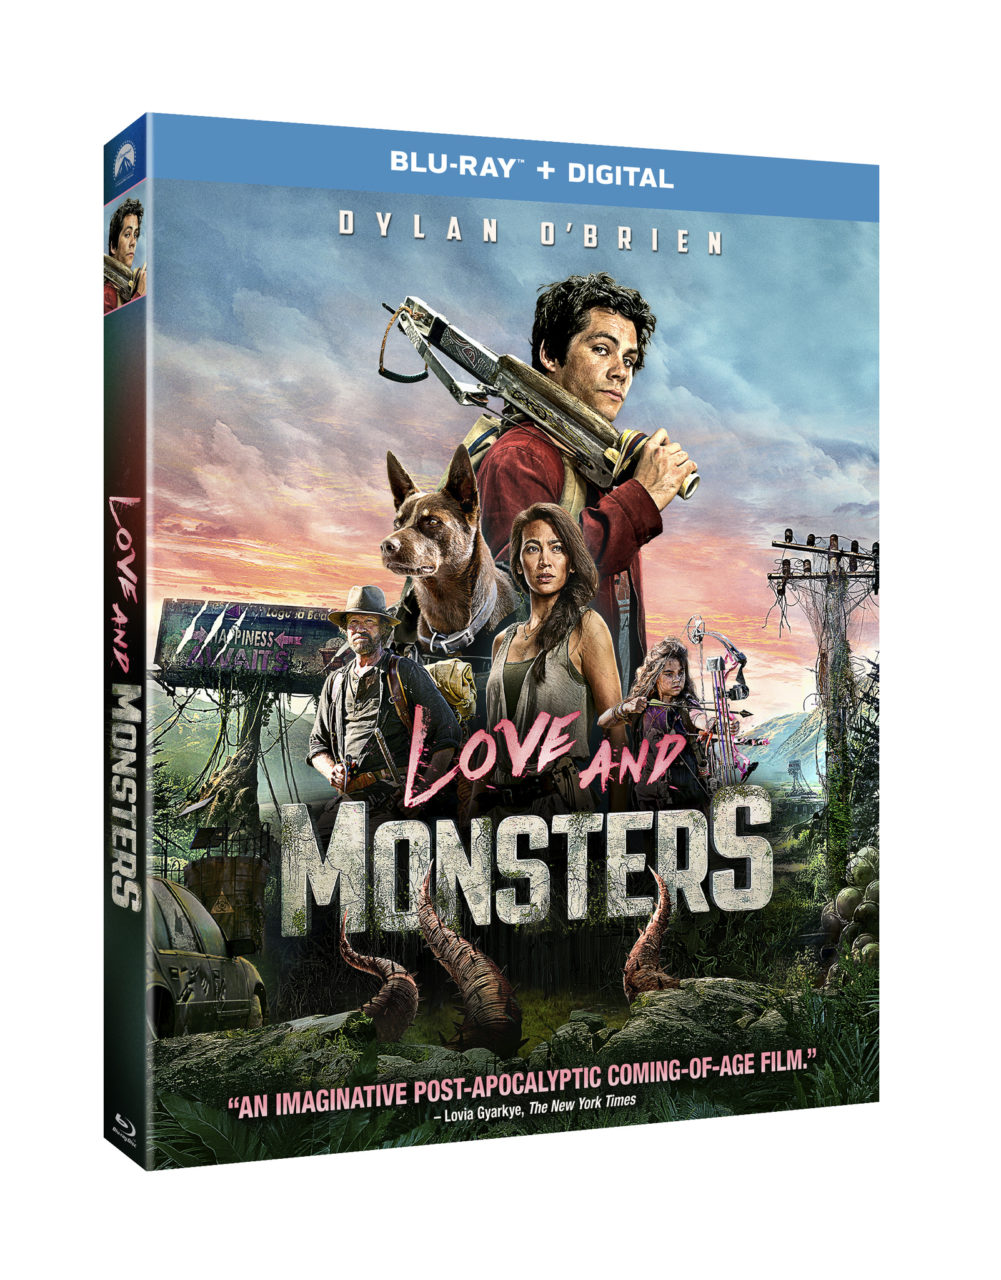 Love And Monsters Blu-Ray Combo Pack cover (Paramount Home Entertainment)